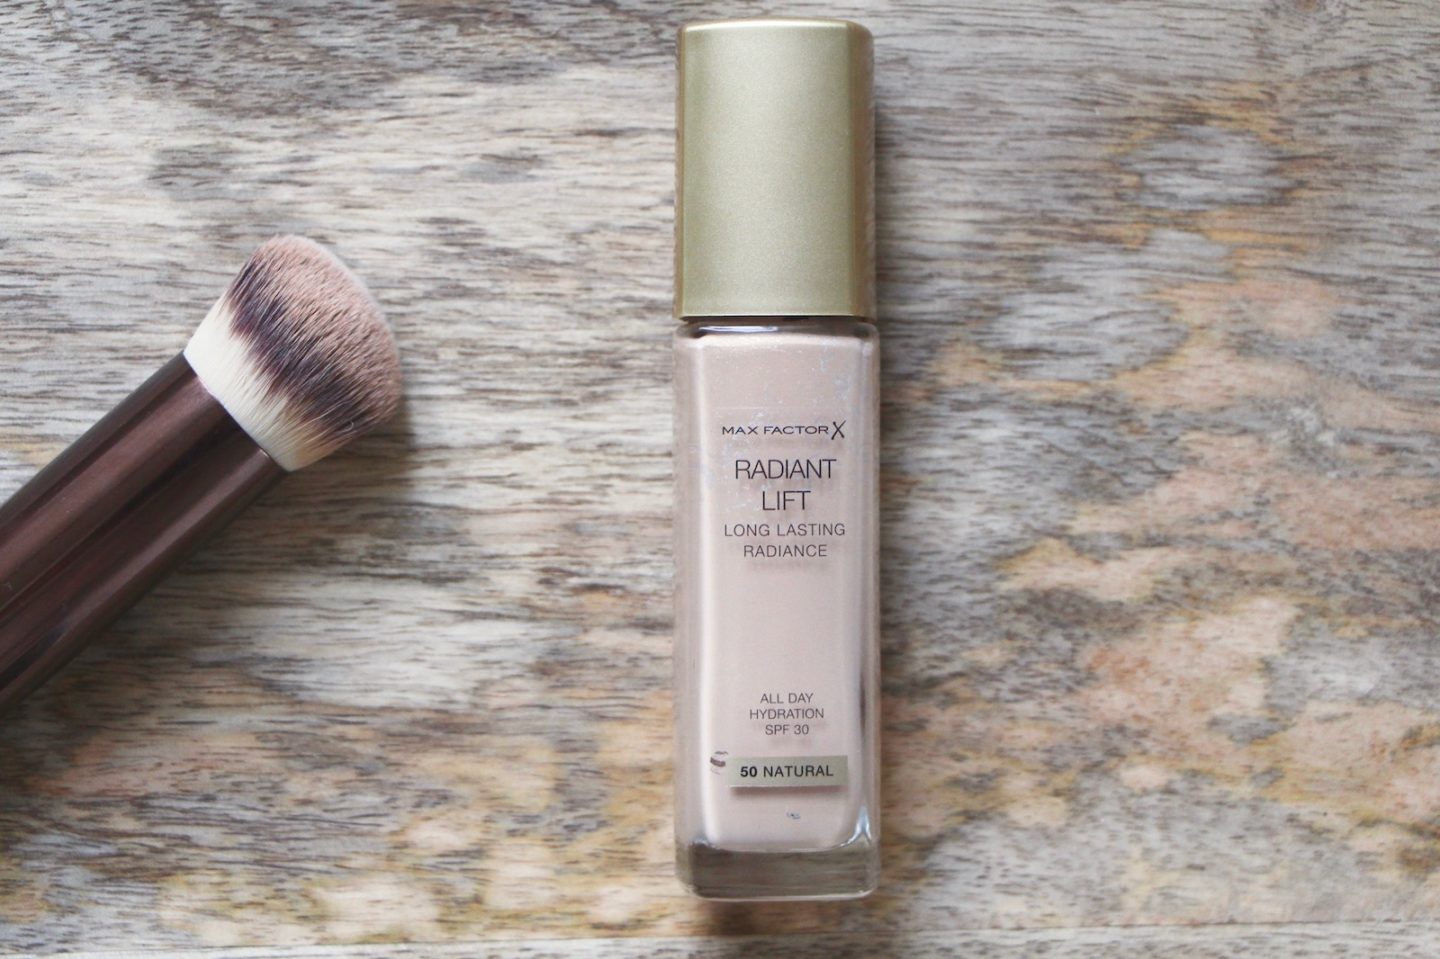 Disgrace Berri simultaneous Foundation Review: Max Factor Radiant Lift - Ruth Crilly